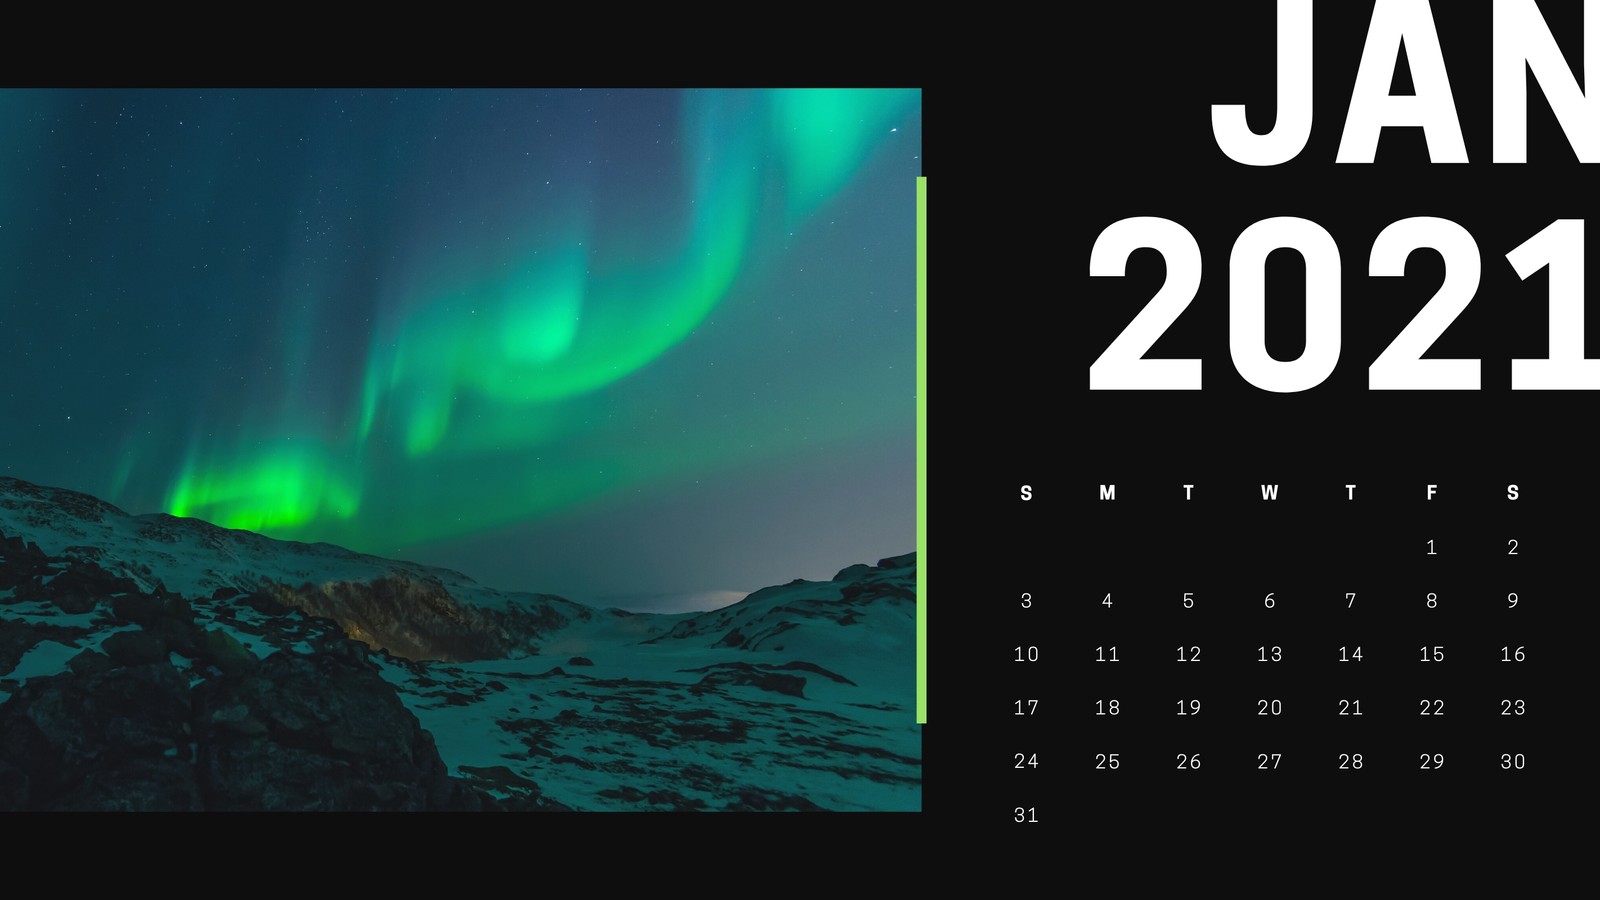 Black with Northern Lights Photos Weekly Calendar